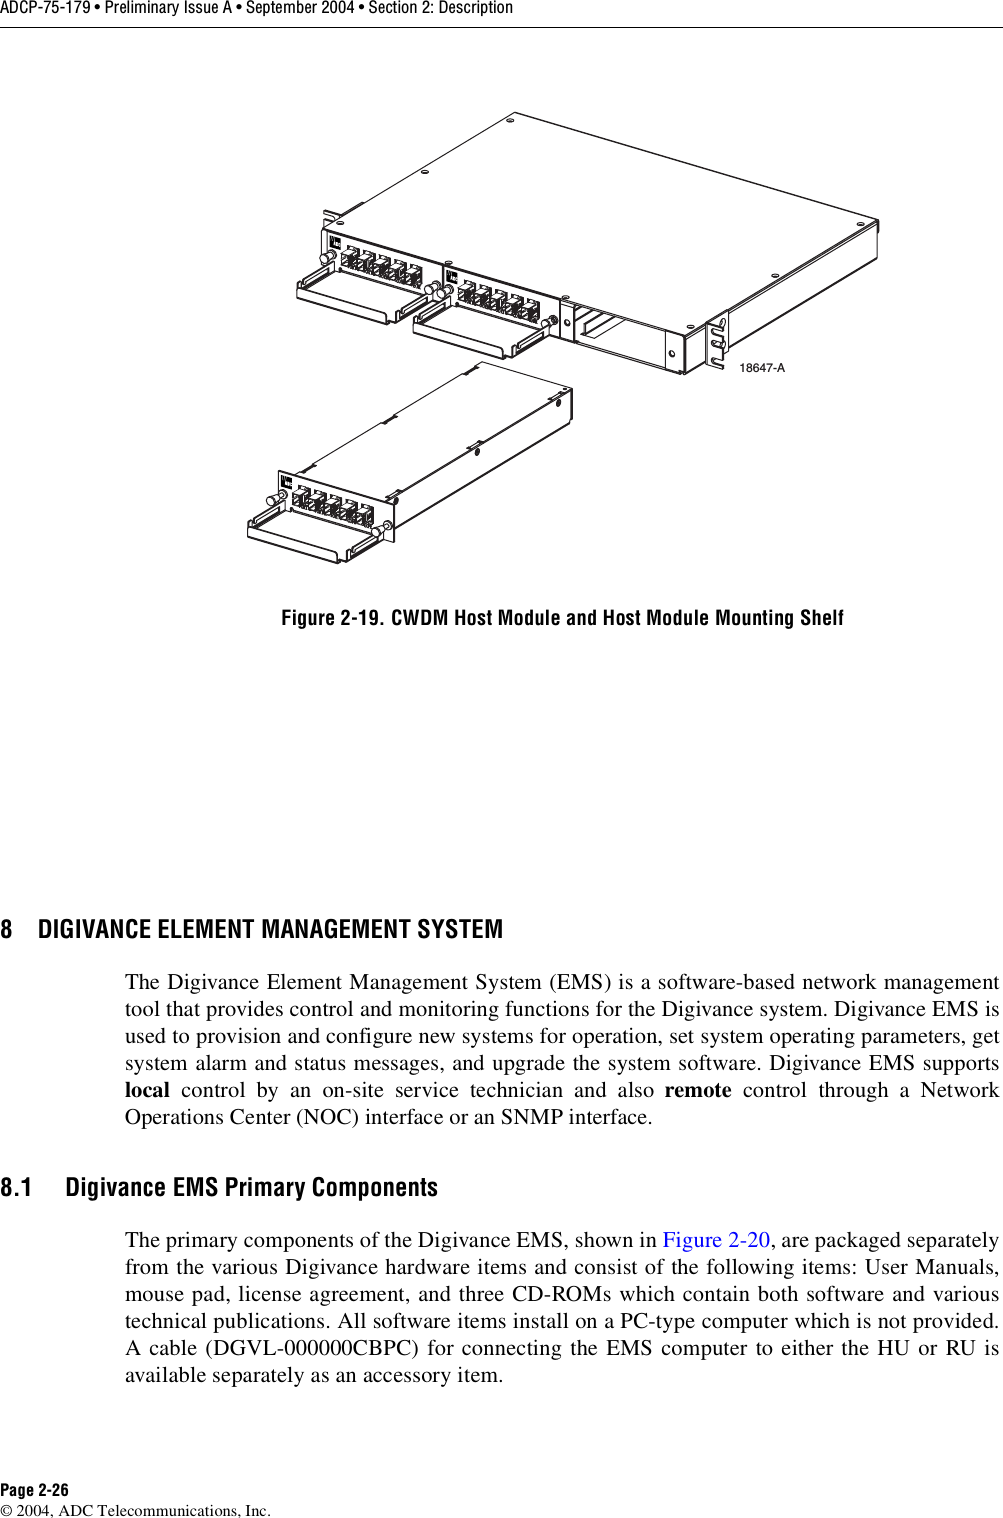 ADCP-75-179 • Preliminary Issue A • September 2004 • Section 2: DescriptionPage 2-26© 2004, ADC Telecommunications, Inc.Figure 2-19. CWDM Host Module and Host Module Mounting Shelf8 DIGIVANCE ELEMENT MANAGEMENT SYSTEMThe Digivance Element Management System (EMS) is a software-based network managementtool that provides control and monitoring functions for the Digivance system. Digivance EMS isused to provision and configure new systems for operation, set system operating parameters, getsystem alarm and status messages, and upgrade the system software. Digivance EMS supportslocal control by an on-site service technician and also remote control through a NetworkOperations Center (NOC) interface or an SNMP interface. 8.1 Digivance EMS Primary ComponentsThe primary components of the Digivance EMS, shown in Figure 2-20, are packaged separatelyfrom the various Digivance hardware items and consist of the following items: User Manuals,mouse pad, license agreement, and three CD-ROMs which contain both software and varioustechnical publications. All software items install on a PC-type computer which is not provided.A cable (DGVL-000000CBPC) for connecting the EMS computer to either the HU or RU isavailable separately as an accessory item. 18647-A